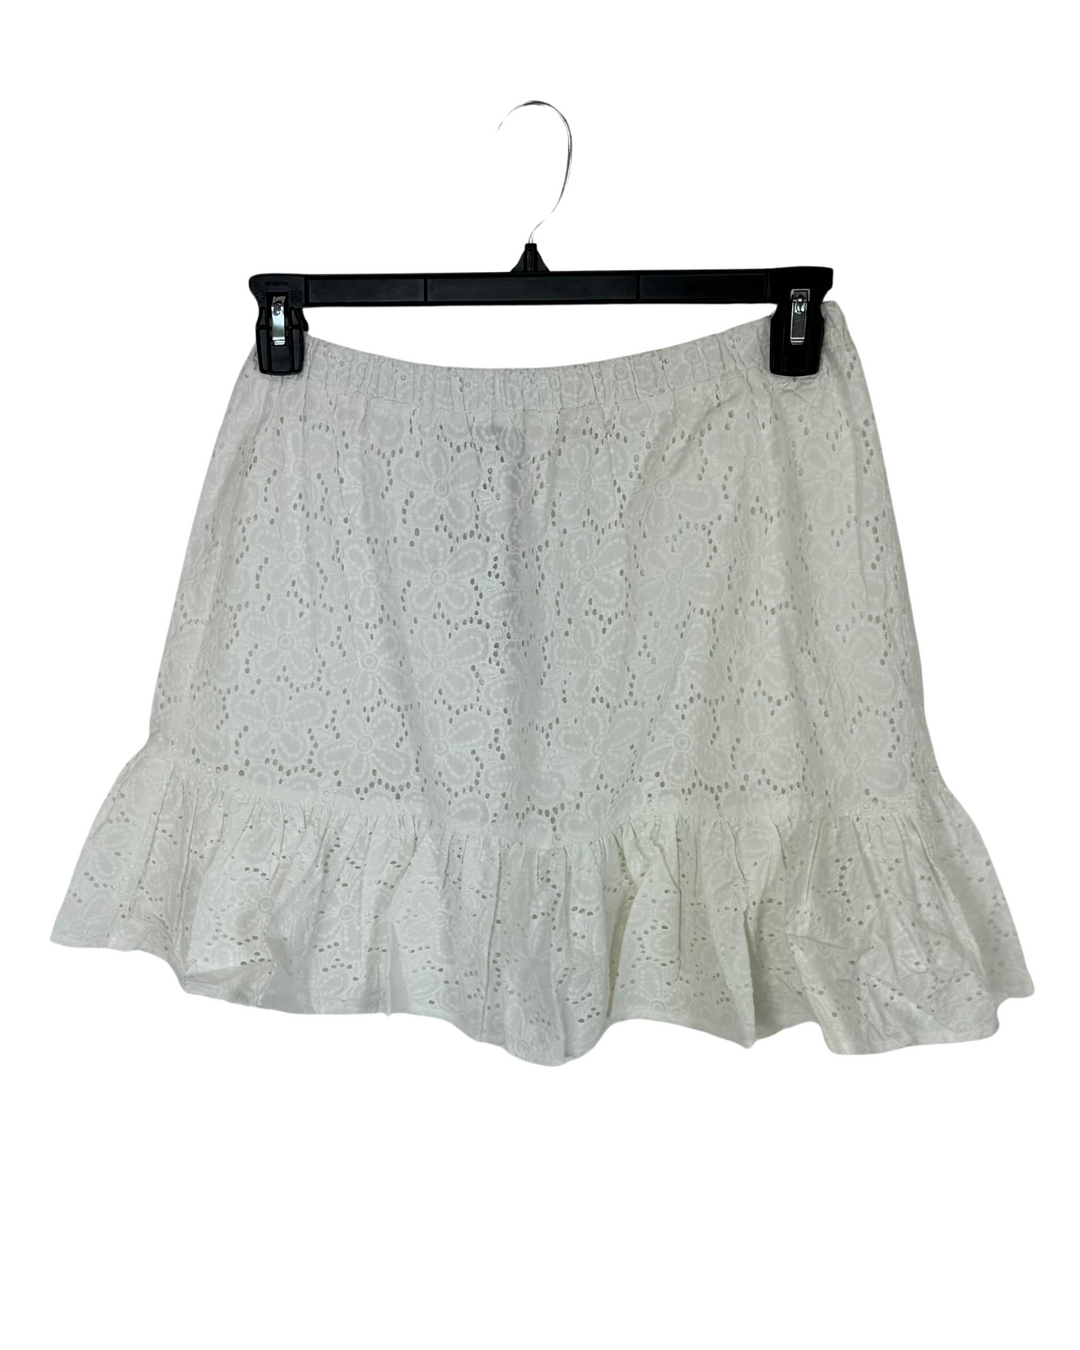 White Thick Lace Floral Skirt - Size 8/10